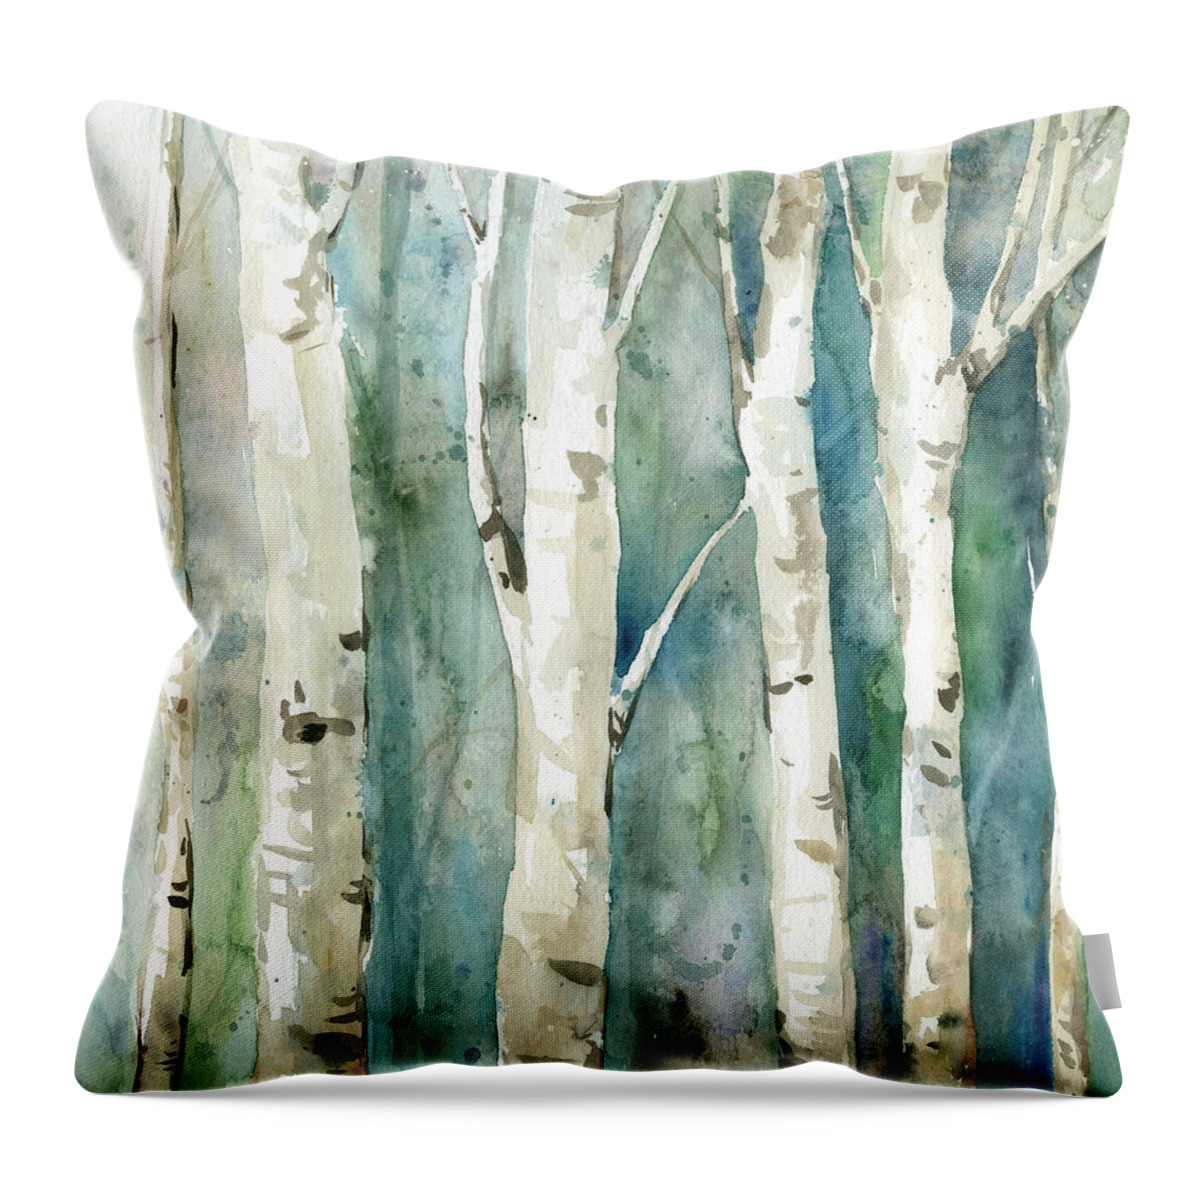 Contemporary Watercolor Birch Trees Washy Teals Greens Tan Throw Pillow featuring the painting Watery Birch 2 by Carol Robinson